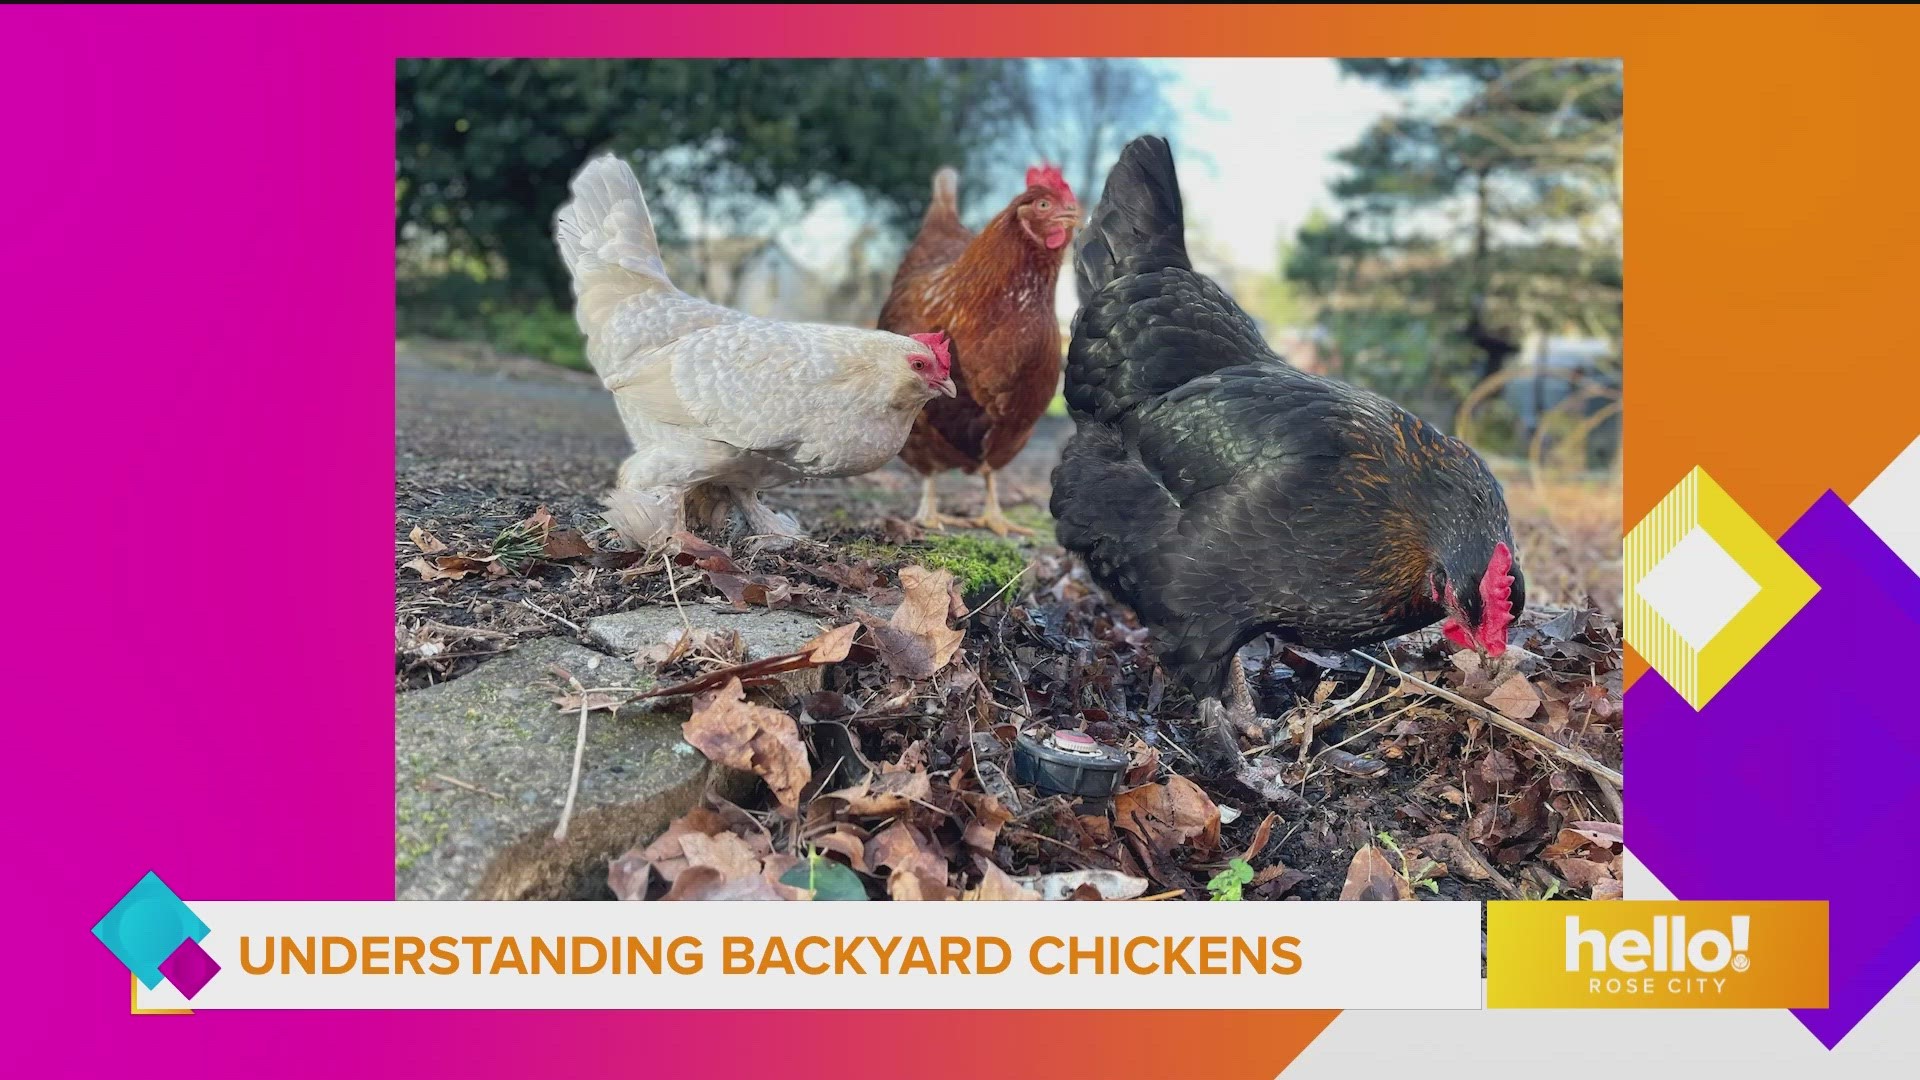 Local author Tove Danovich's new book is Under the Henfluence: Inside the World of Backyard Chickens and the People who Love Them